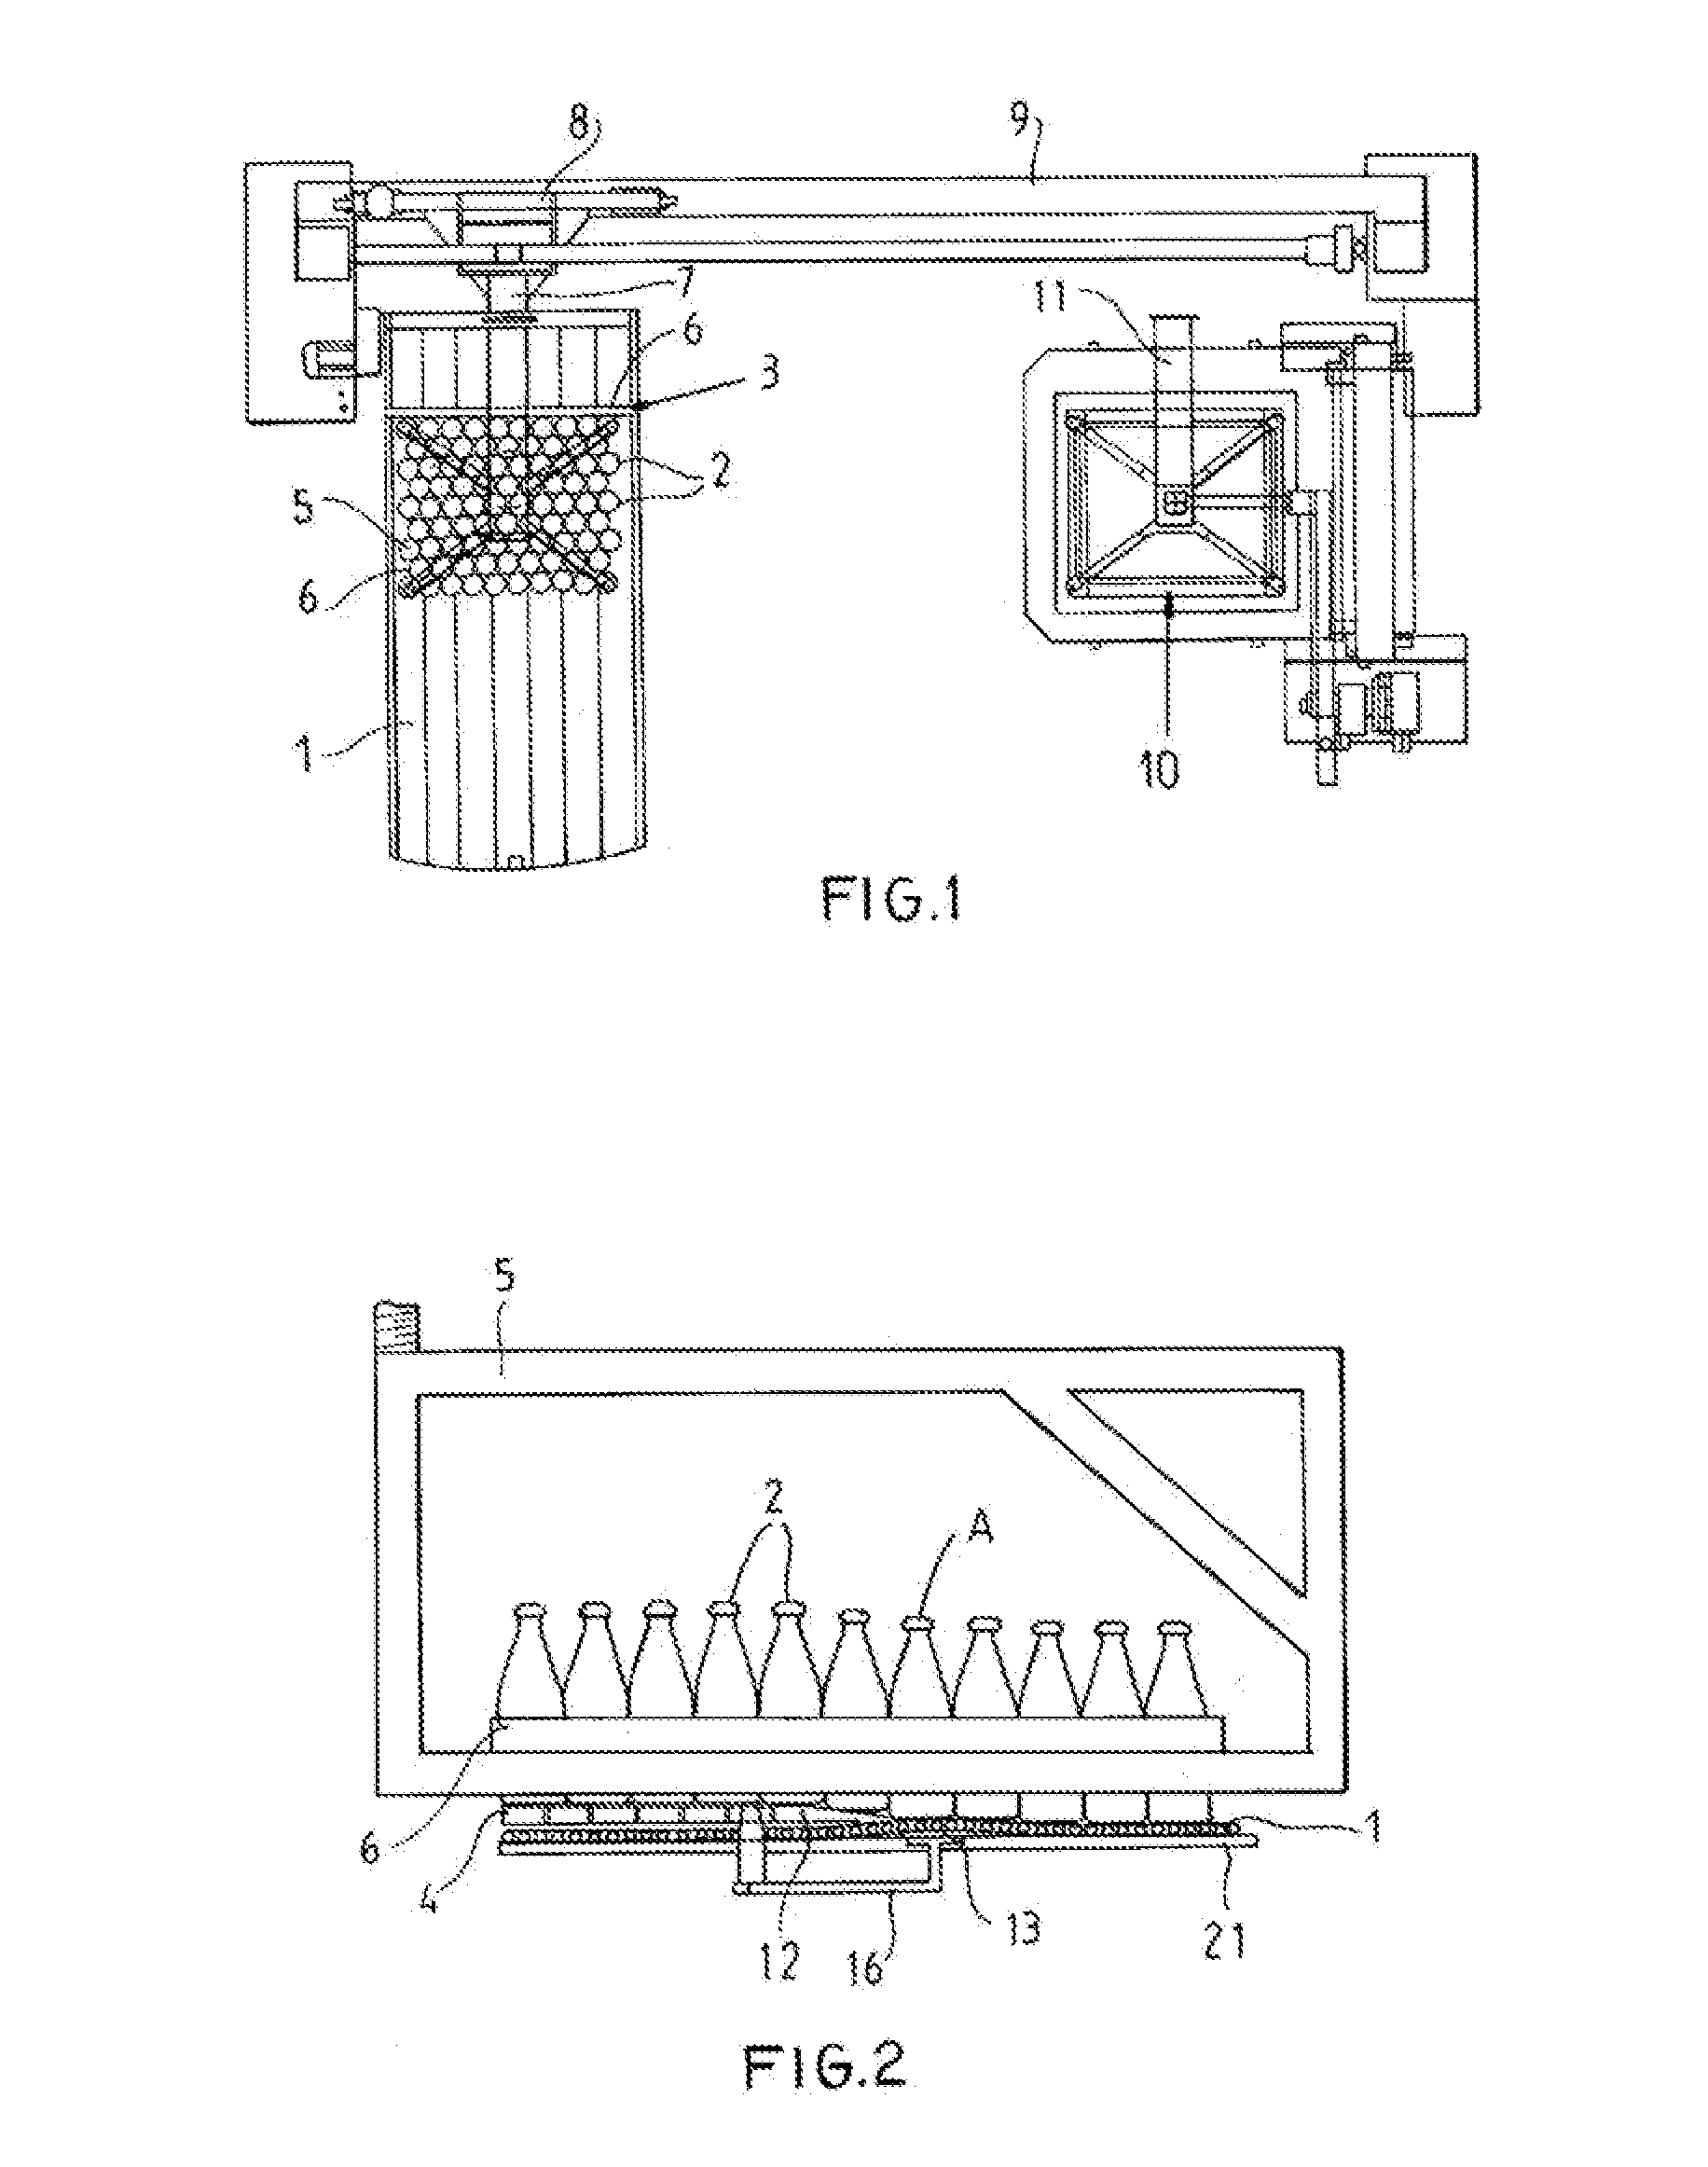 Apparatus for lifting a group of containers or the like